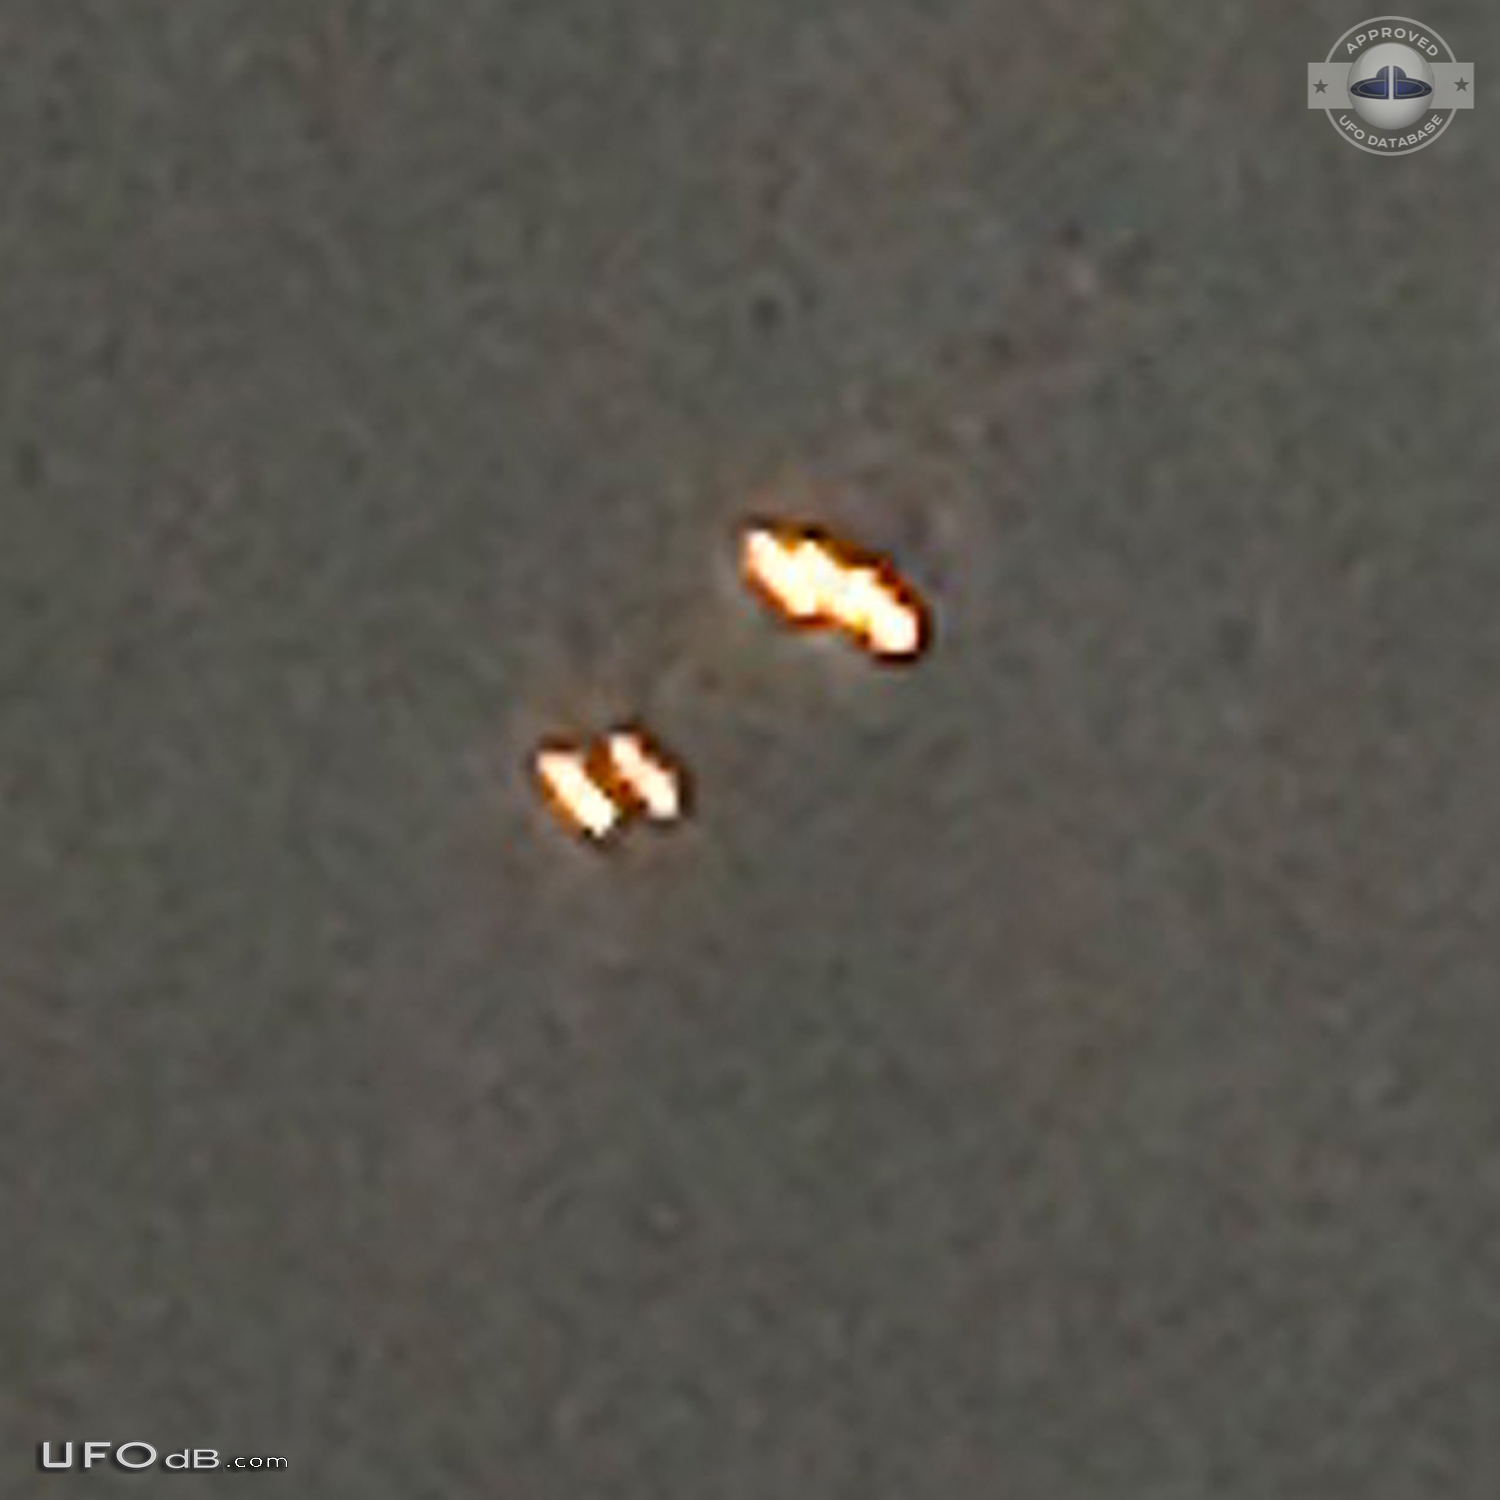 Weird UFO going in the water near the Emerald Coast in North Carolina  UFO Picture #843-4